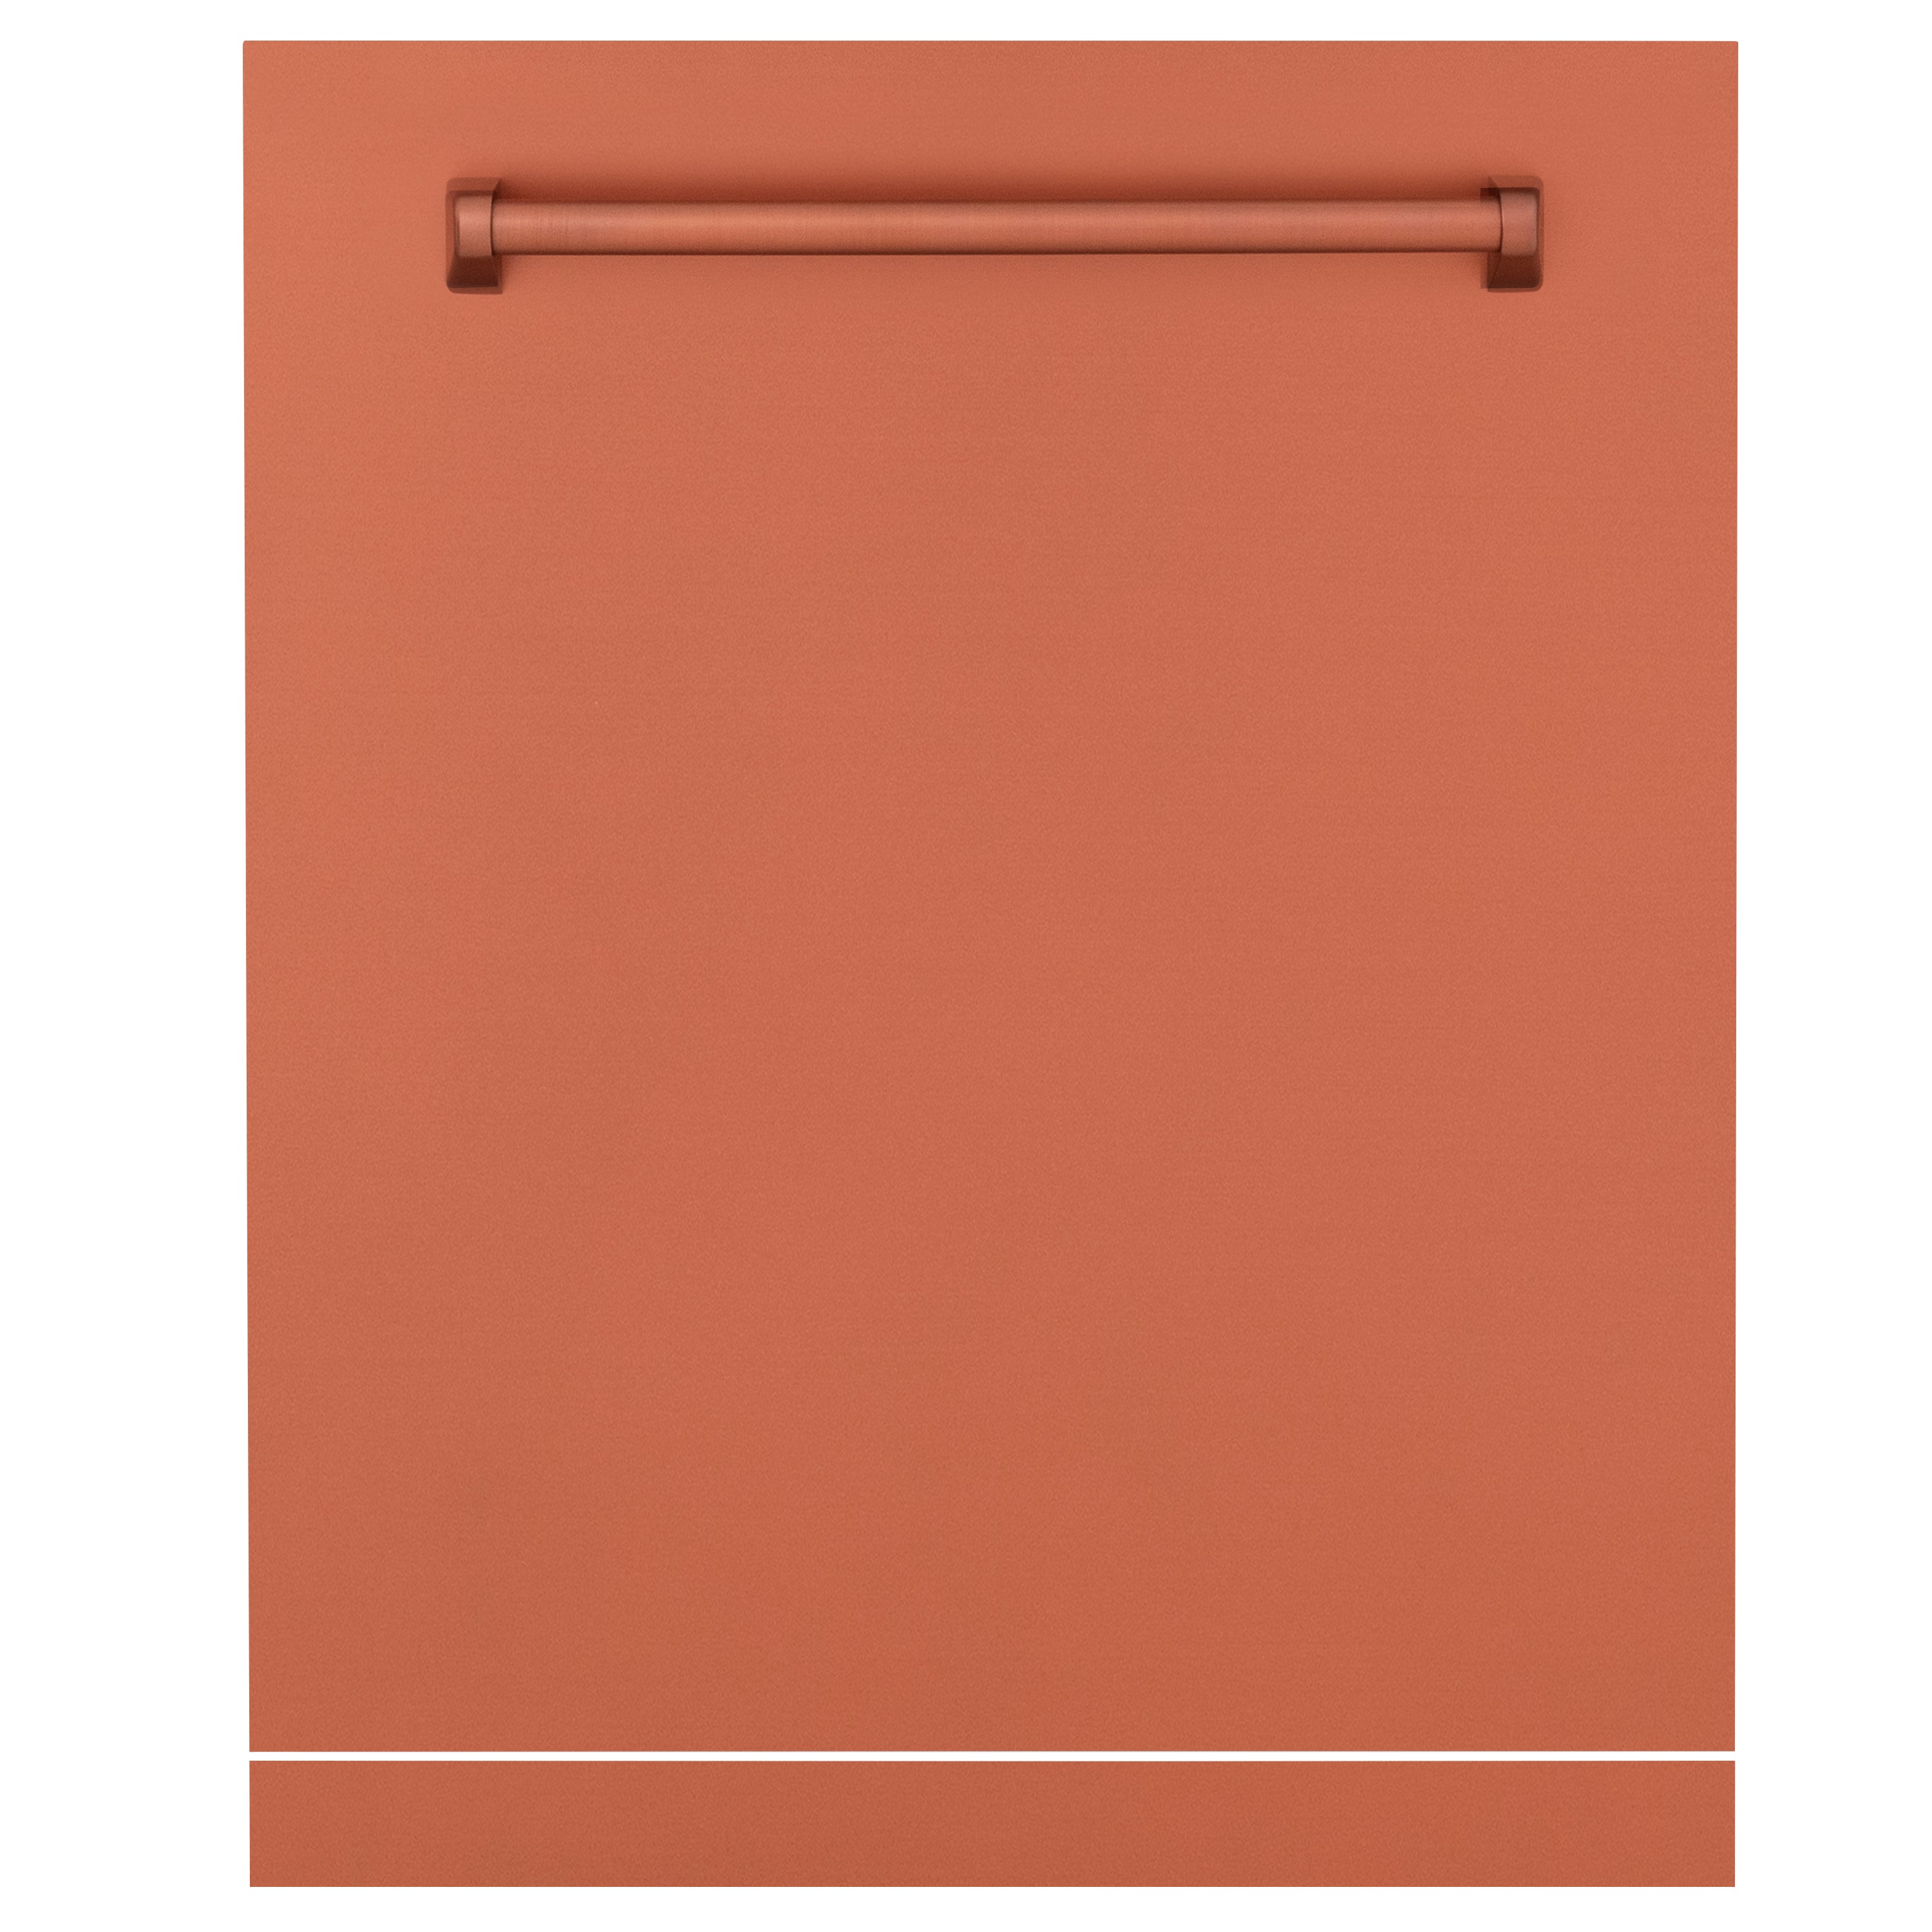 ZLINE 24" Monument Dishwasher Panel in Copper with Traditional Handle (DPMT-C-24)